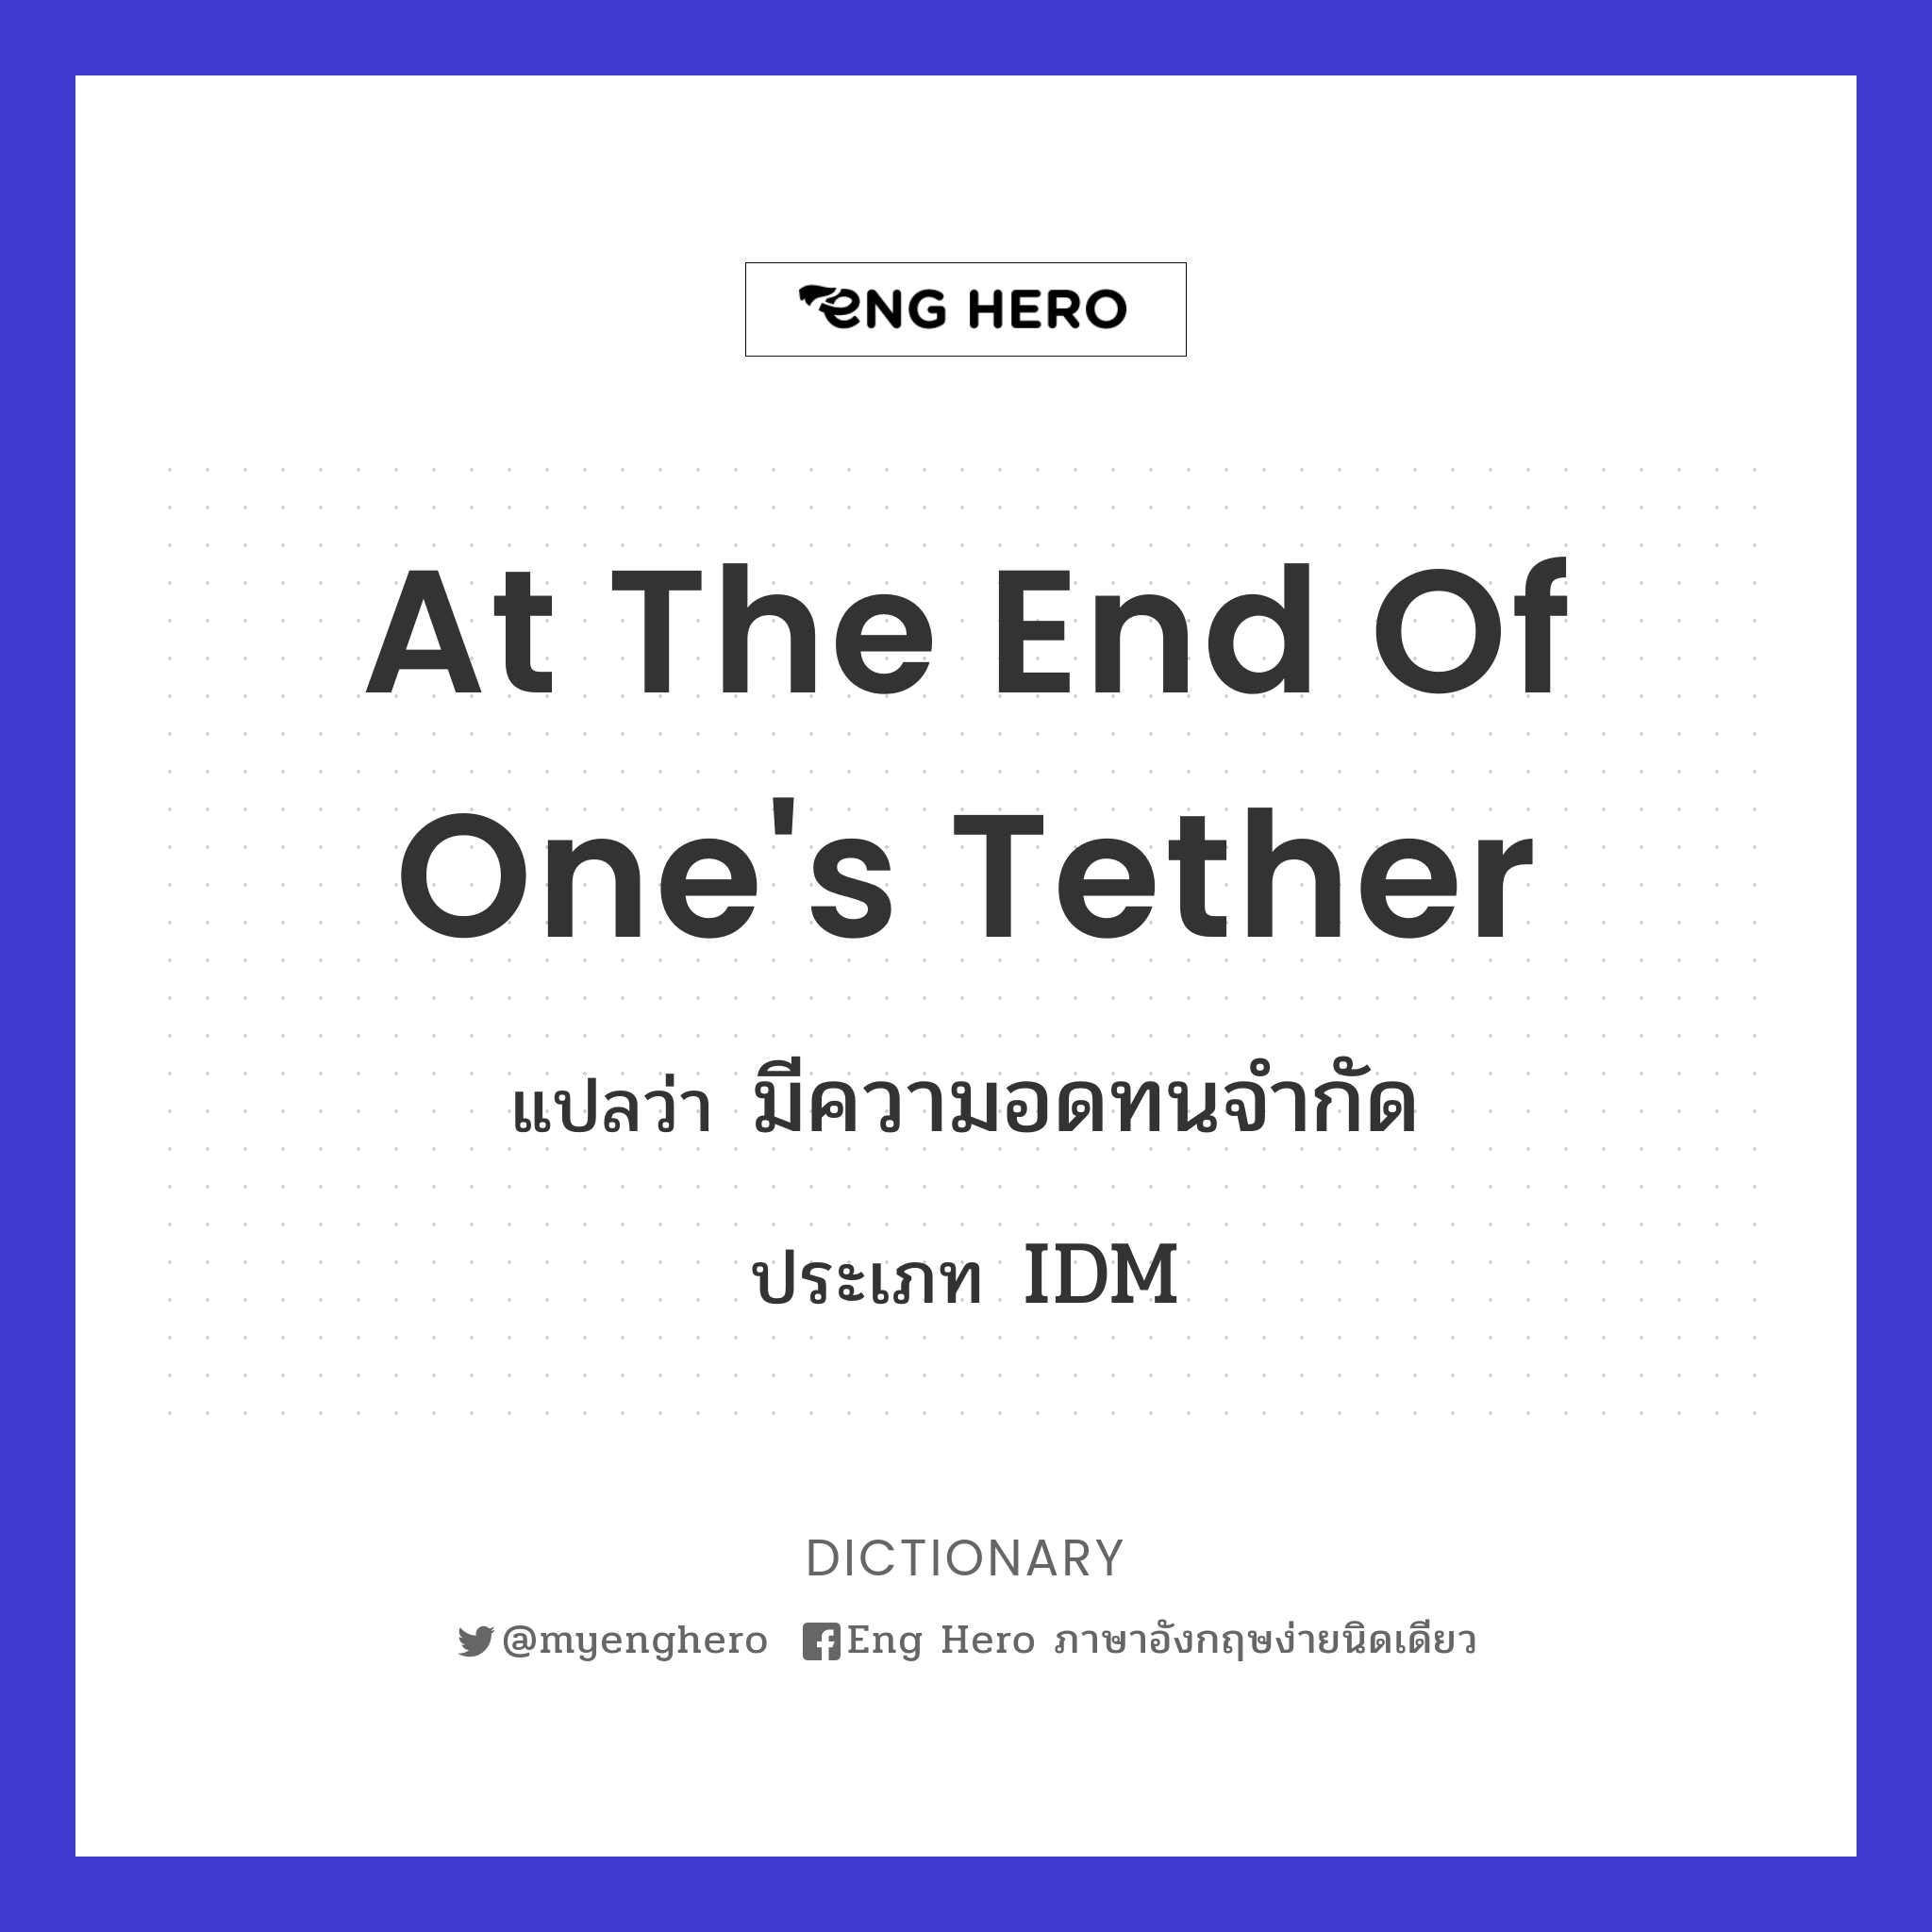 at the end of one's tether